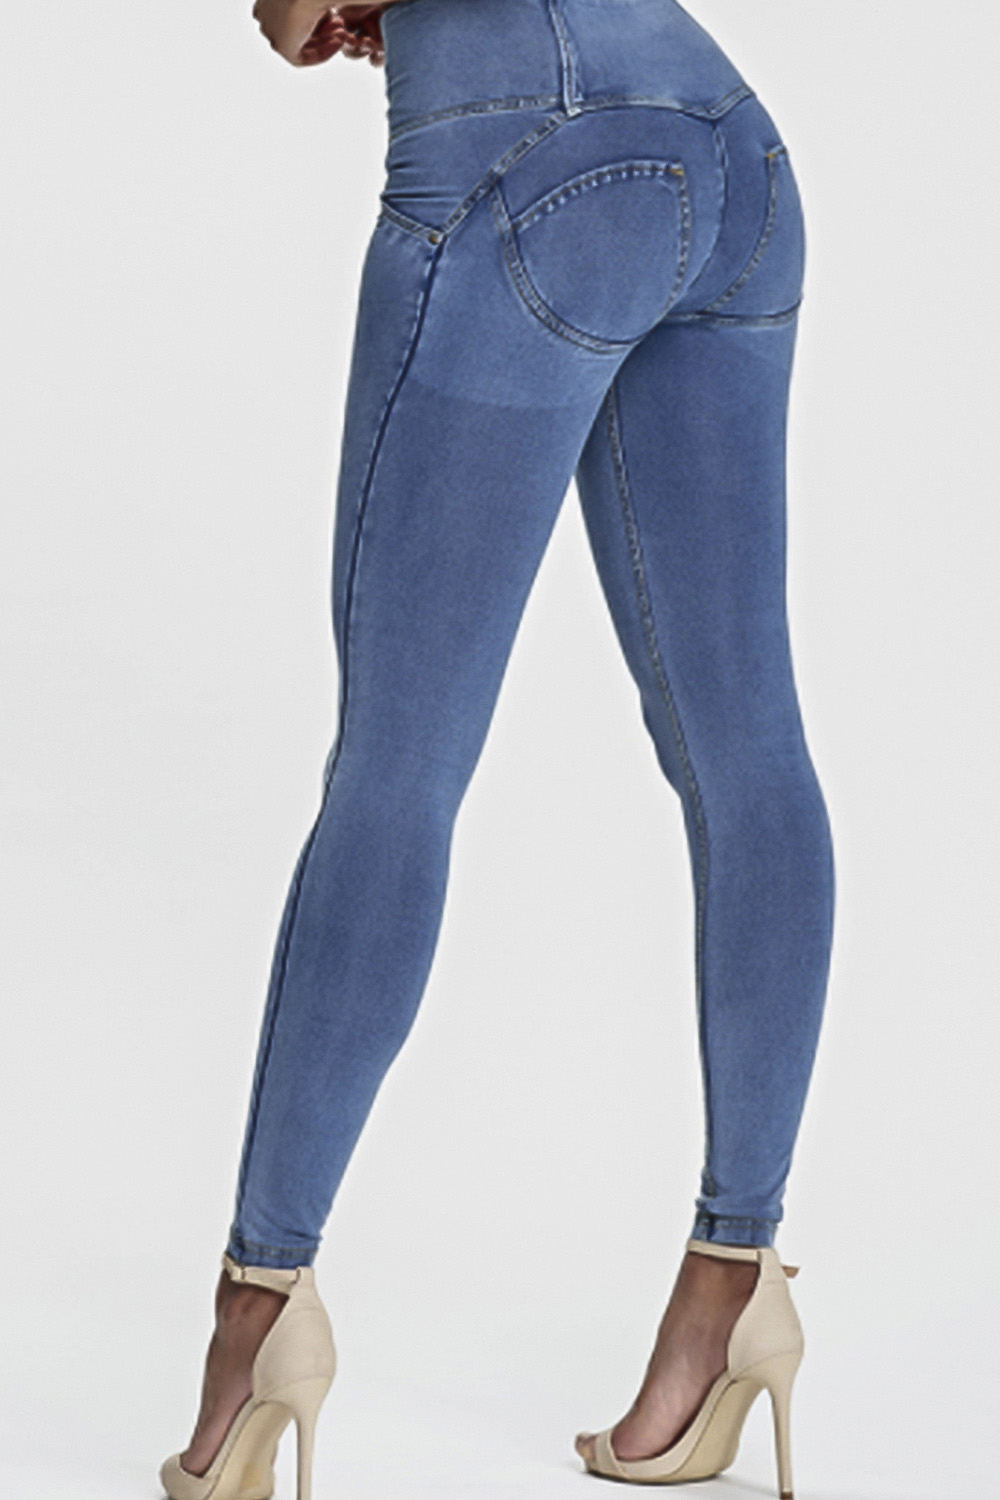 Blue push up leggings with buttons